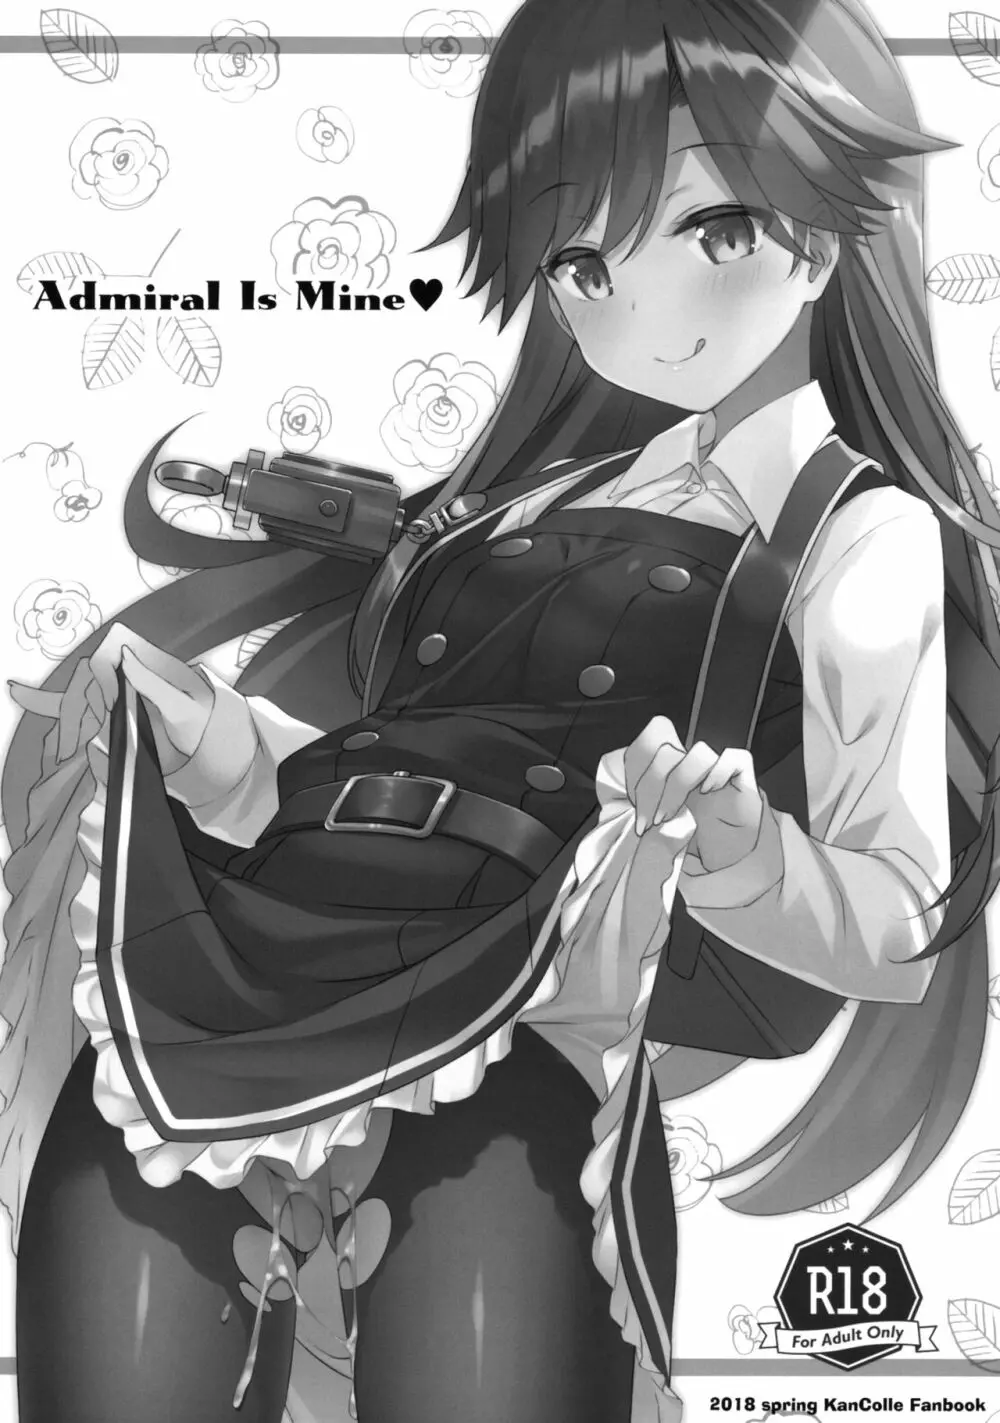 Admiral Is Mine♥ - page2